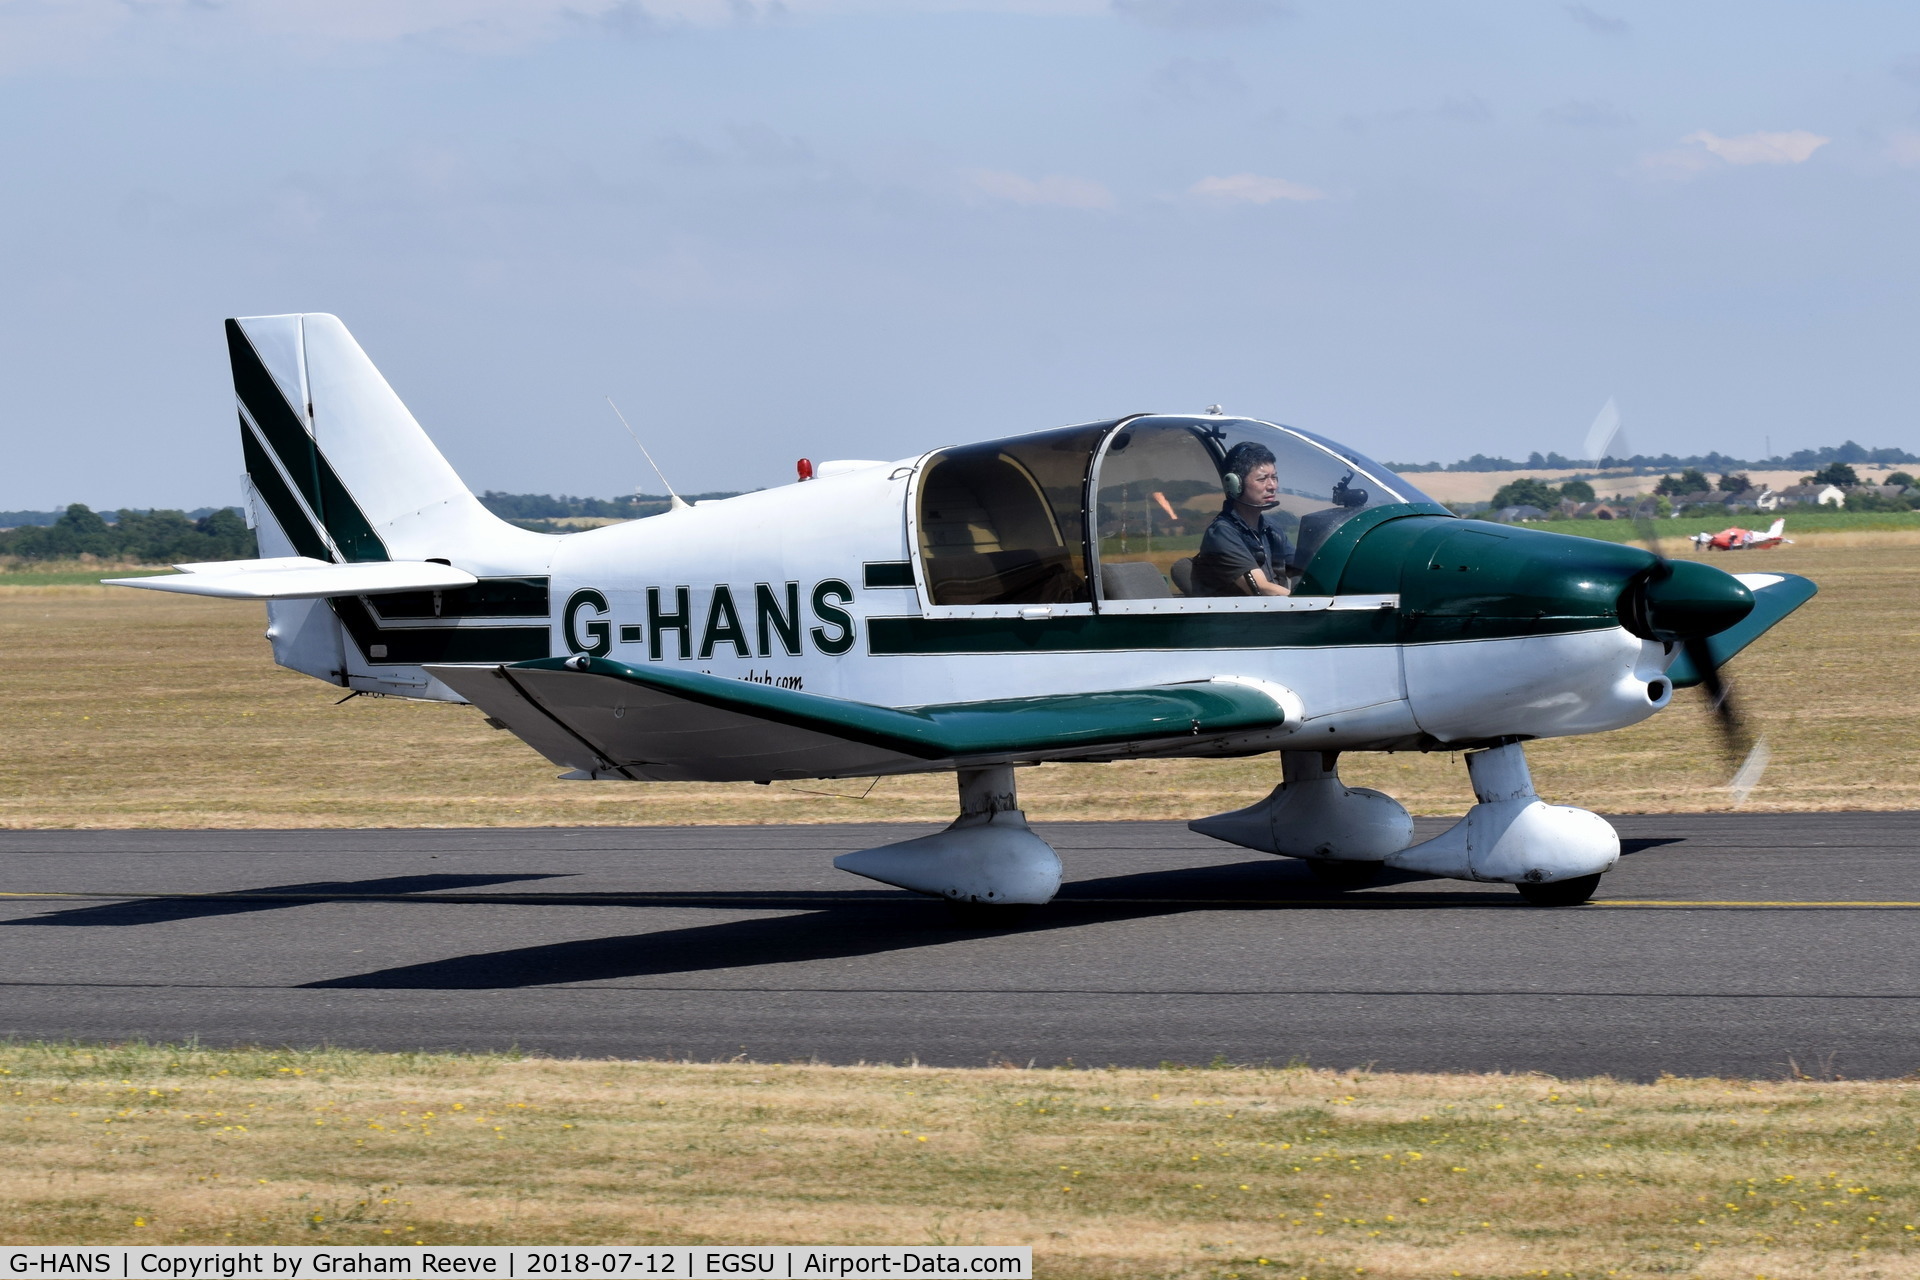 G-HANS, 1979 Robin DR-400-108  Dauphin 2+2 C/N 1384, Departing from Duxford.